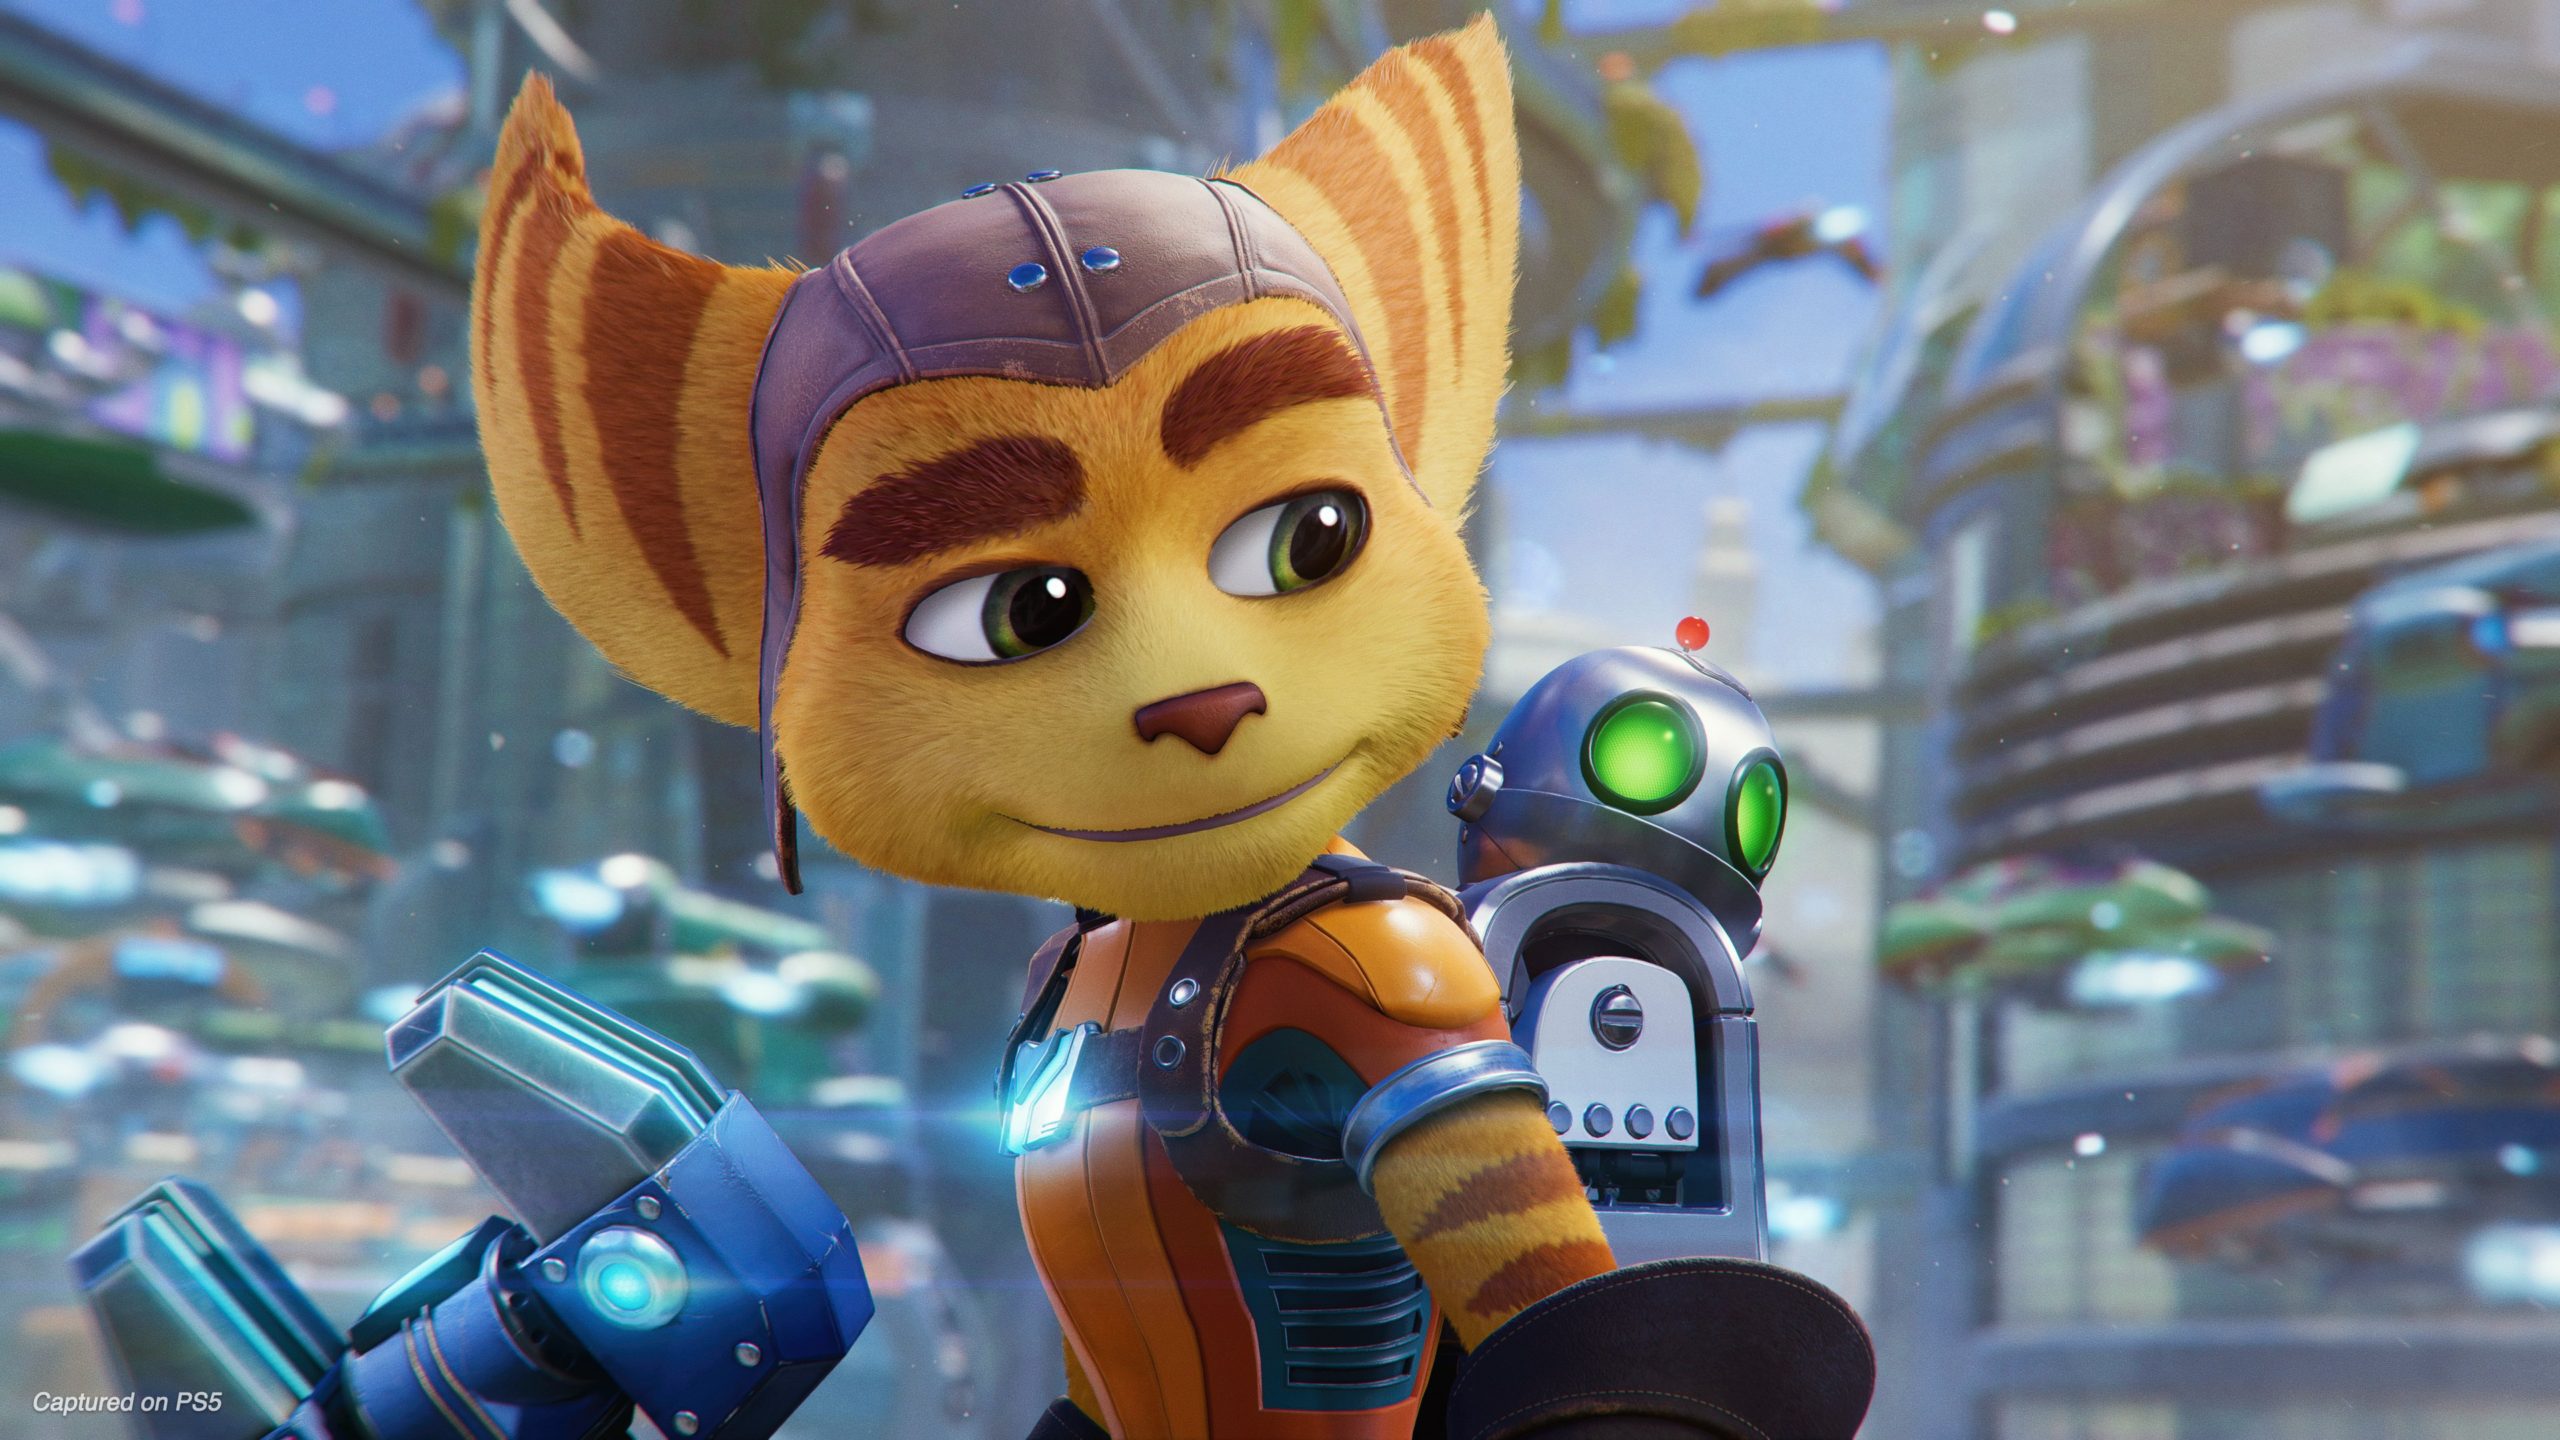 Ratchet with Clank strapped to his back looking at the robot over his shoulder fondly